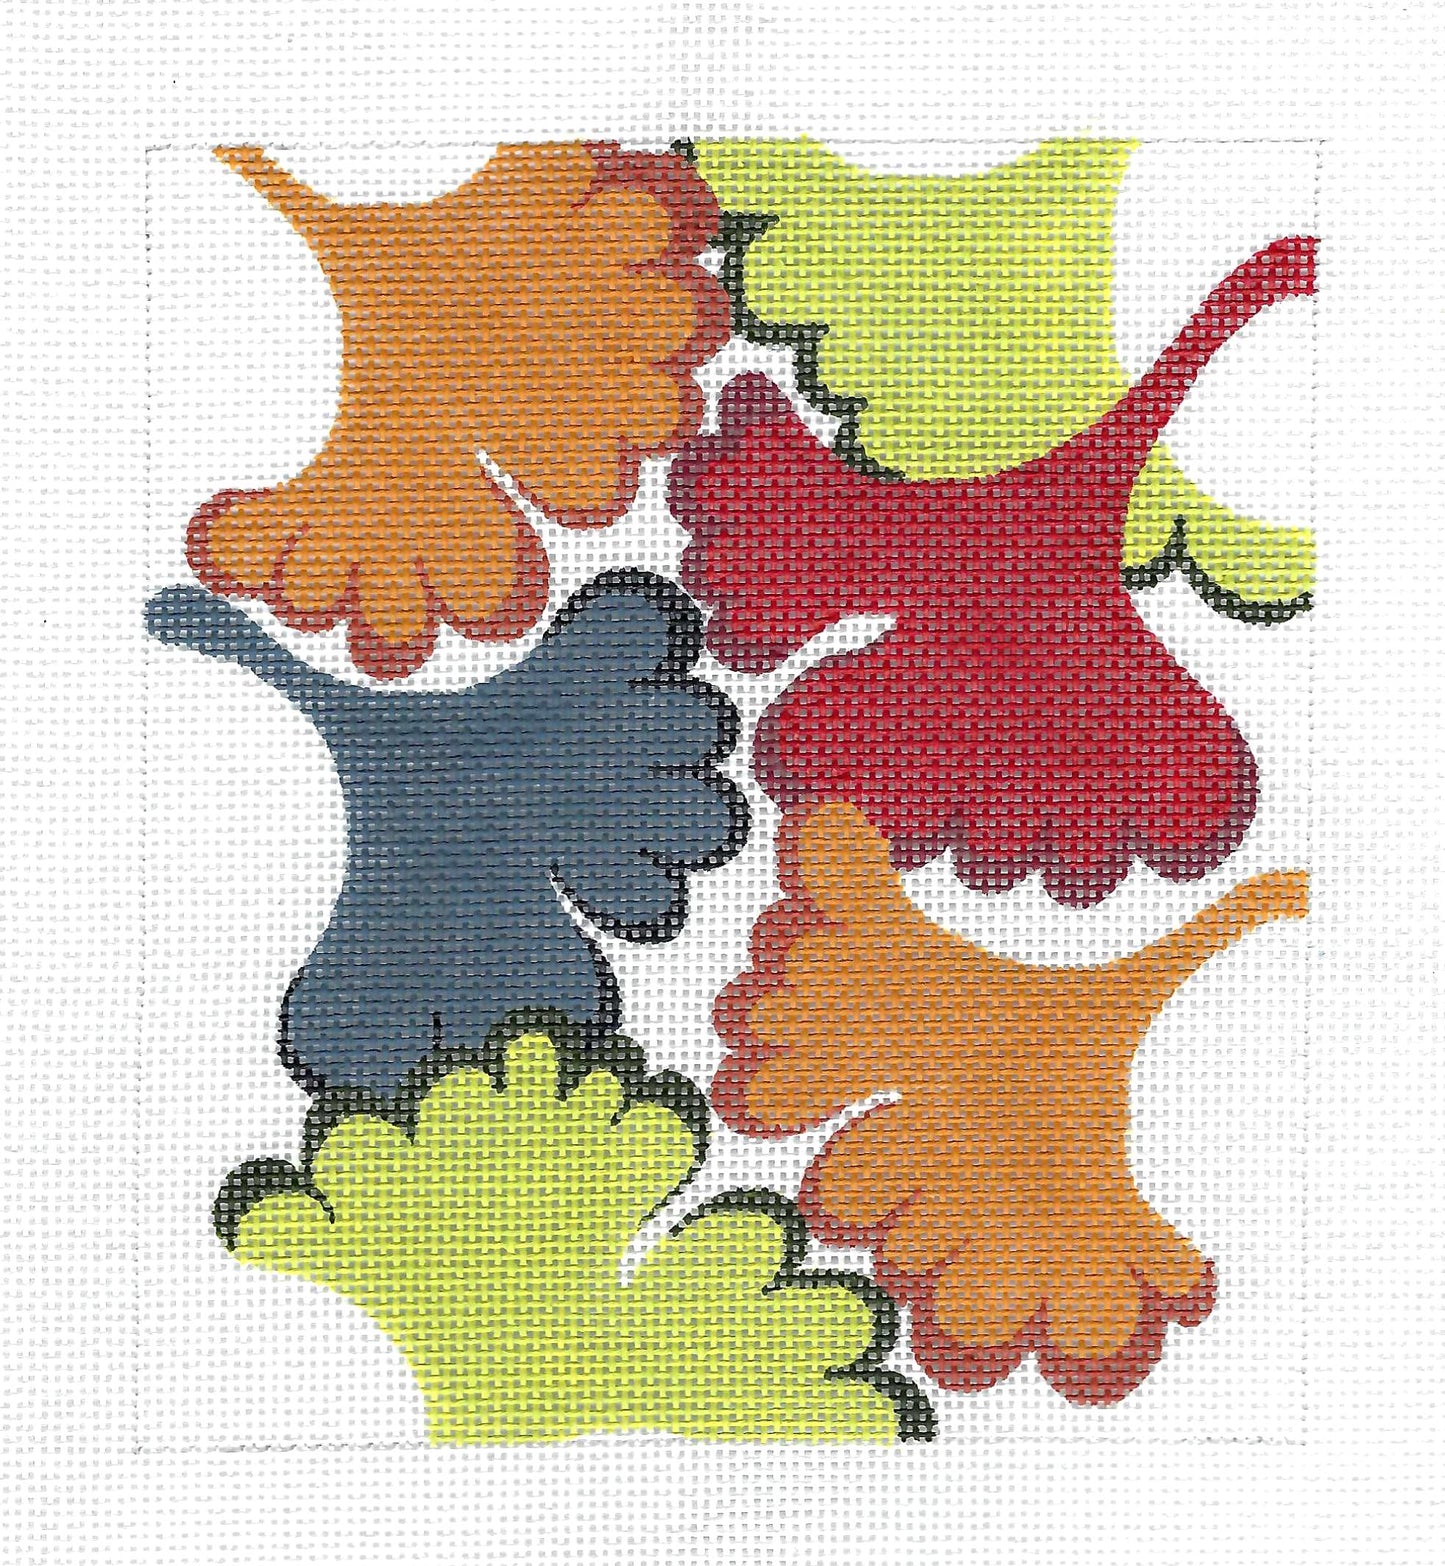 Canvas Insert ~ Multi-Color Ginkgo Leaves handpainted Needlepoint Canvas ~ BG Insert by LEE